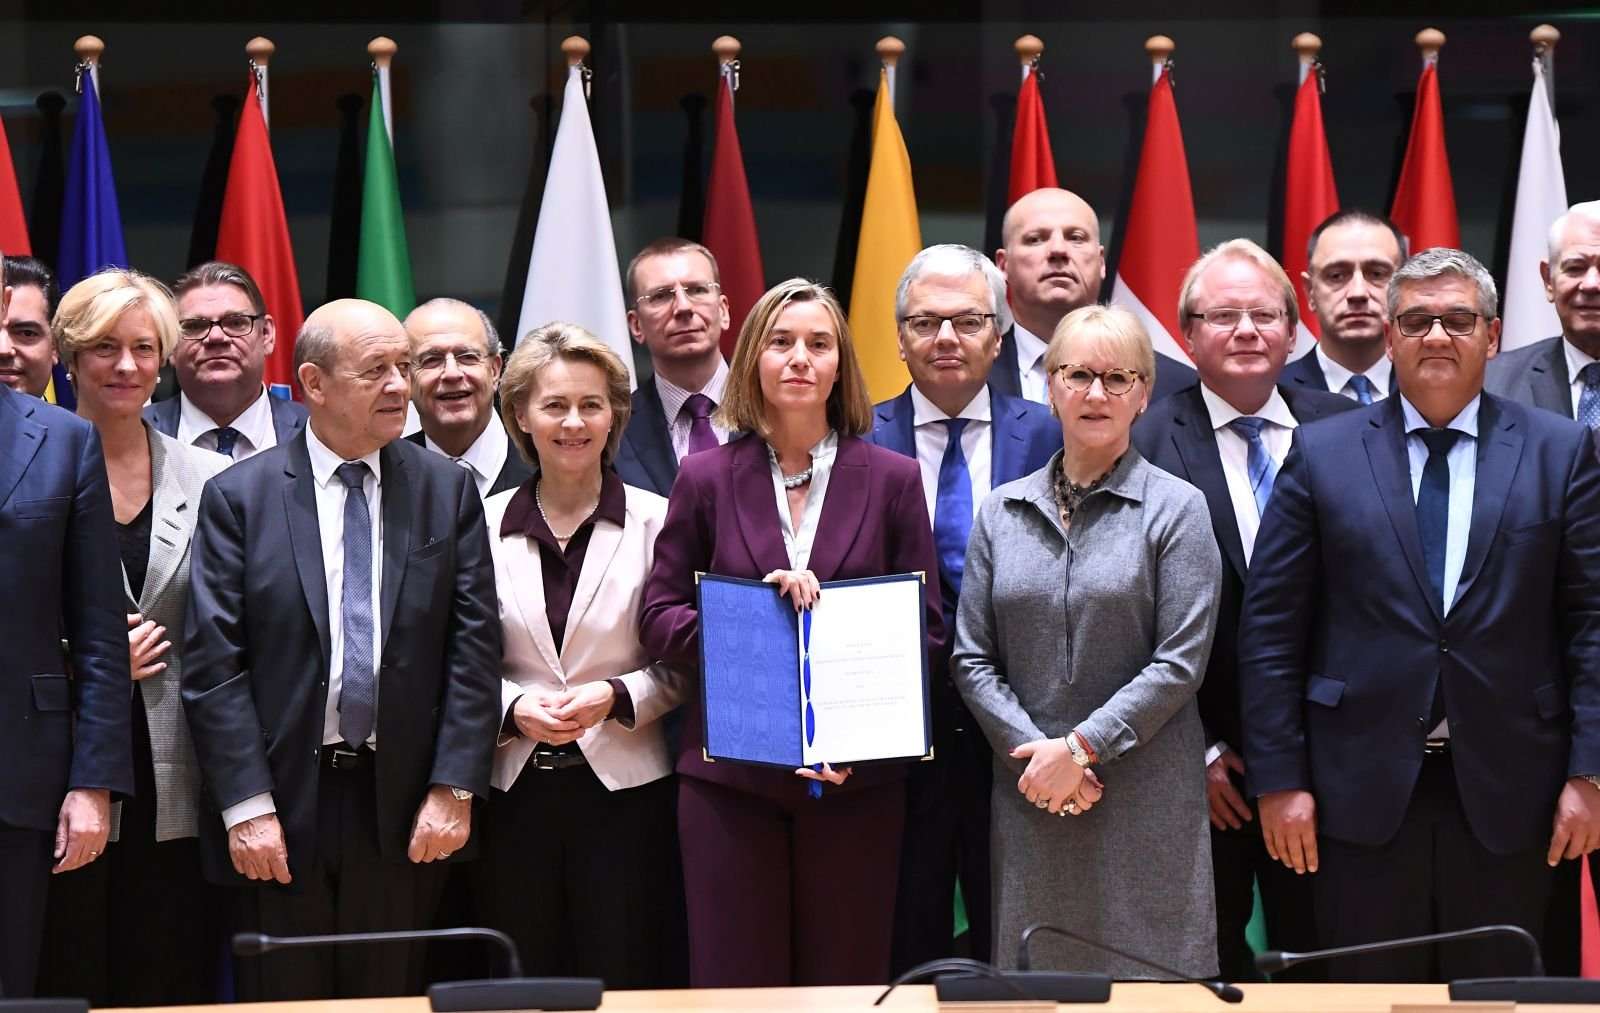 image for The EU signed a “historic” deal to integrate 23 armies to shake off its US dependence